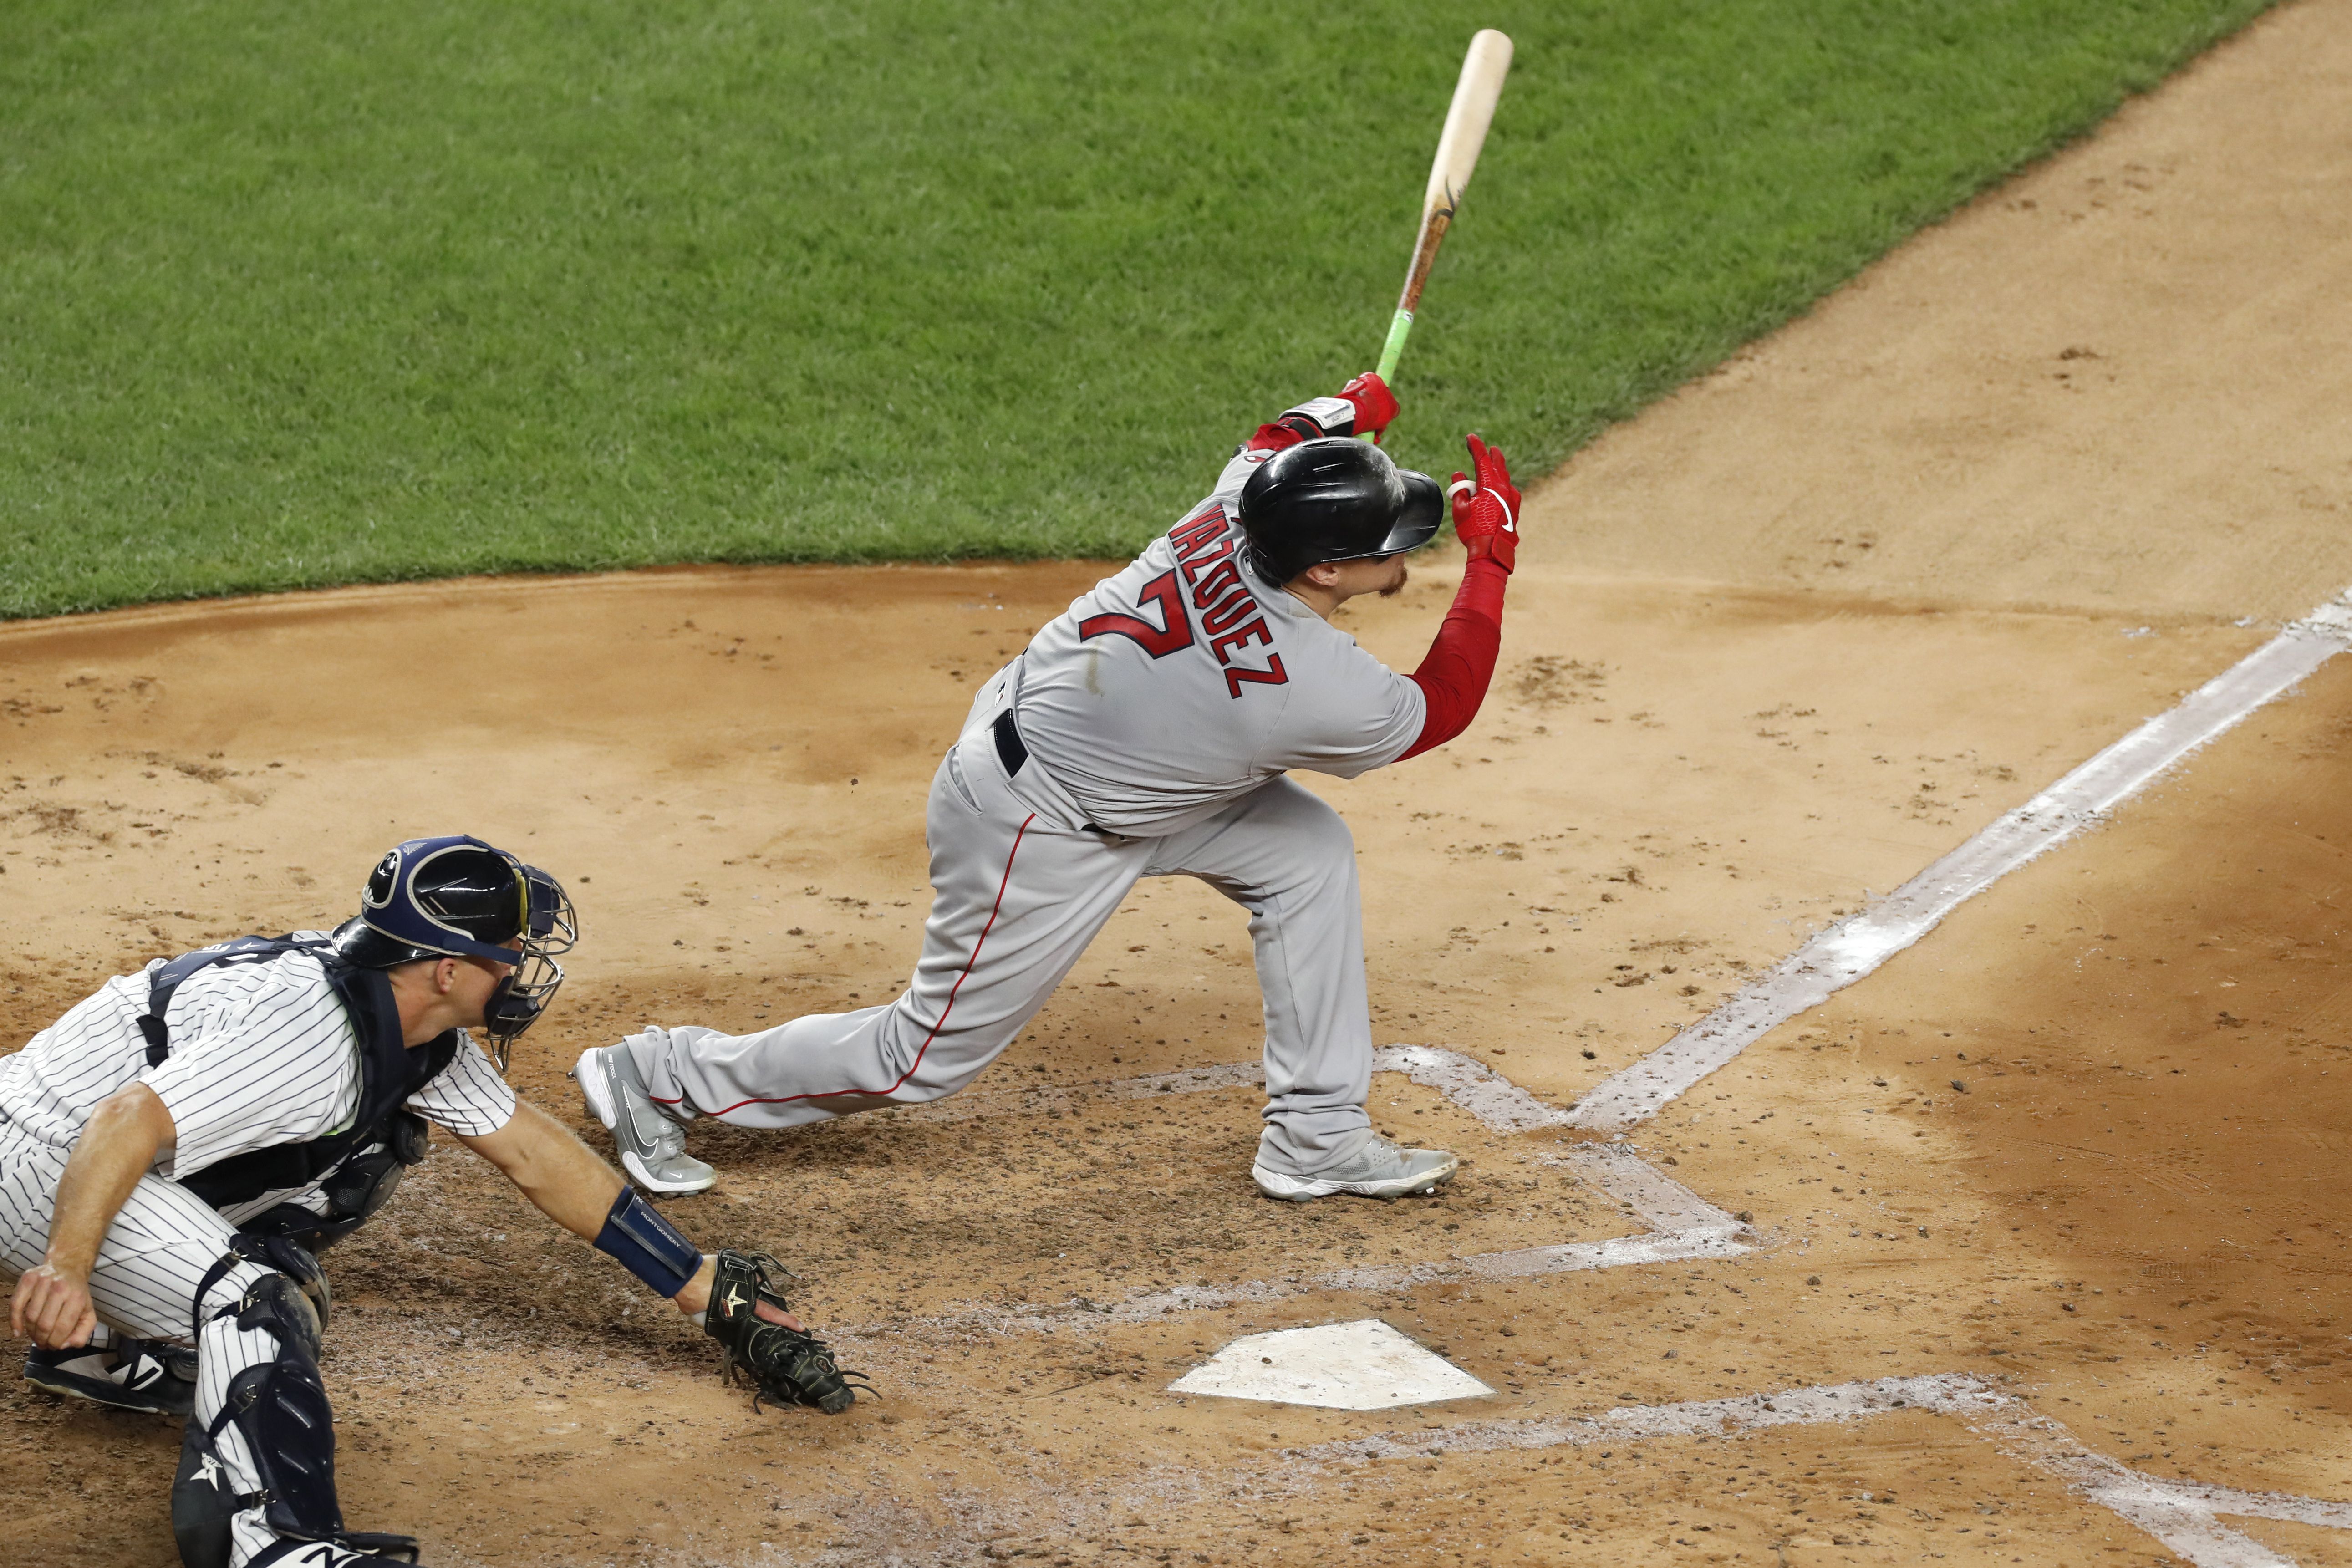 Boston Red Sox drop 8th game in a row in 6-3 loss to Yankees